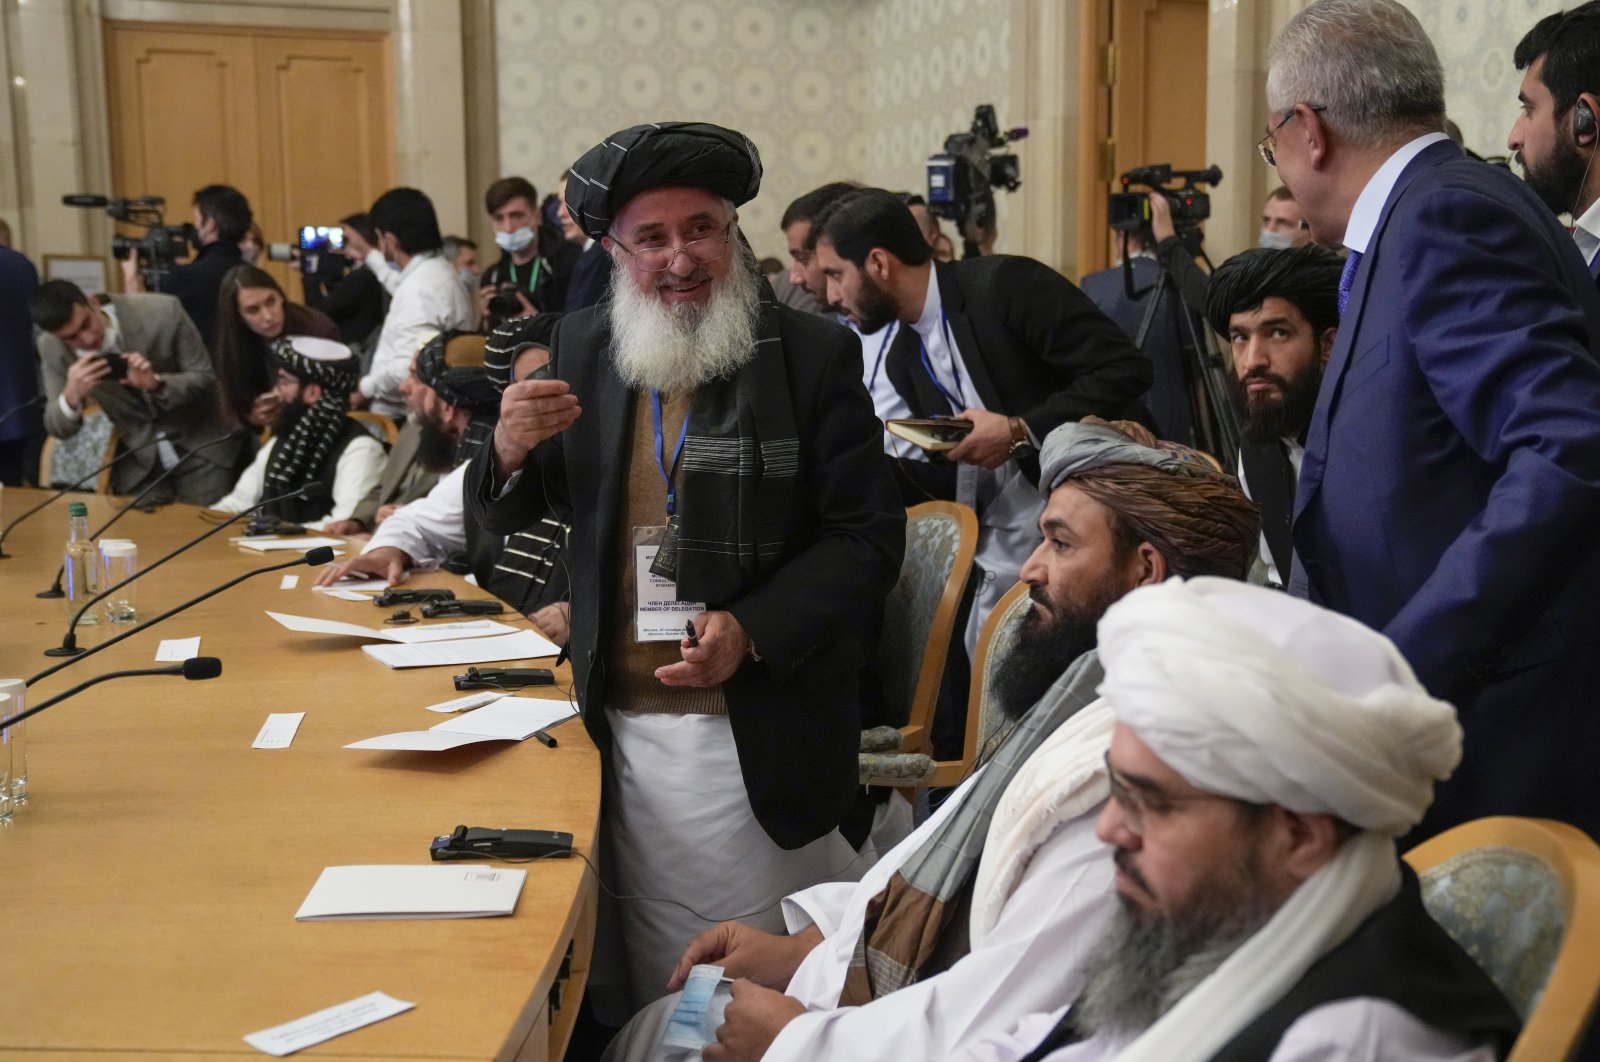 Members of the political delegation from Afghanistan's interim Taliban government attend talks involving Afghan representatives in Moscow, Russia, Oct. 20, 2021. (EPA Photo)